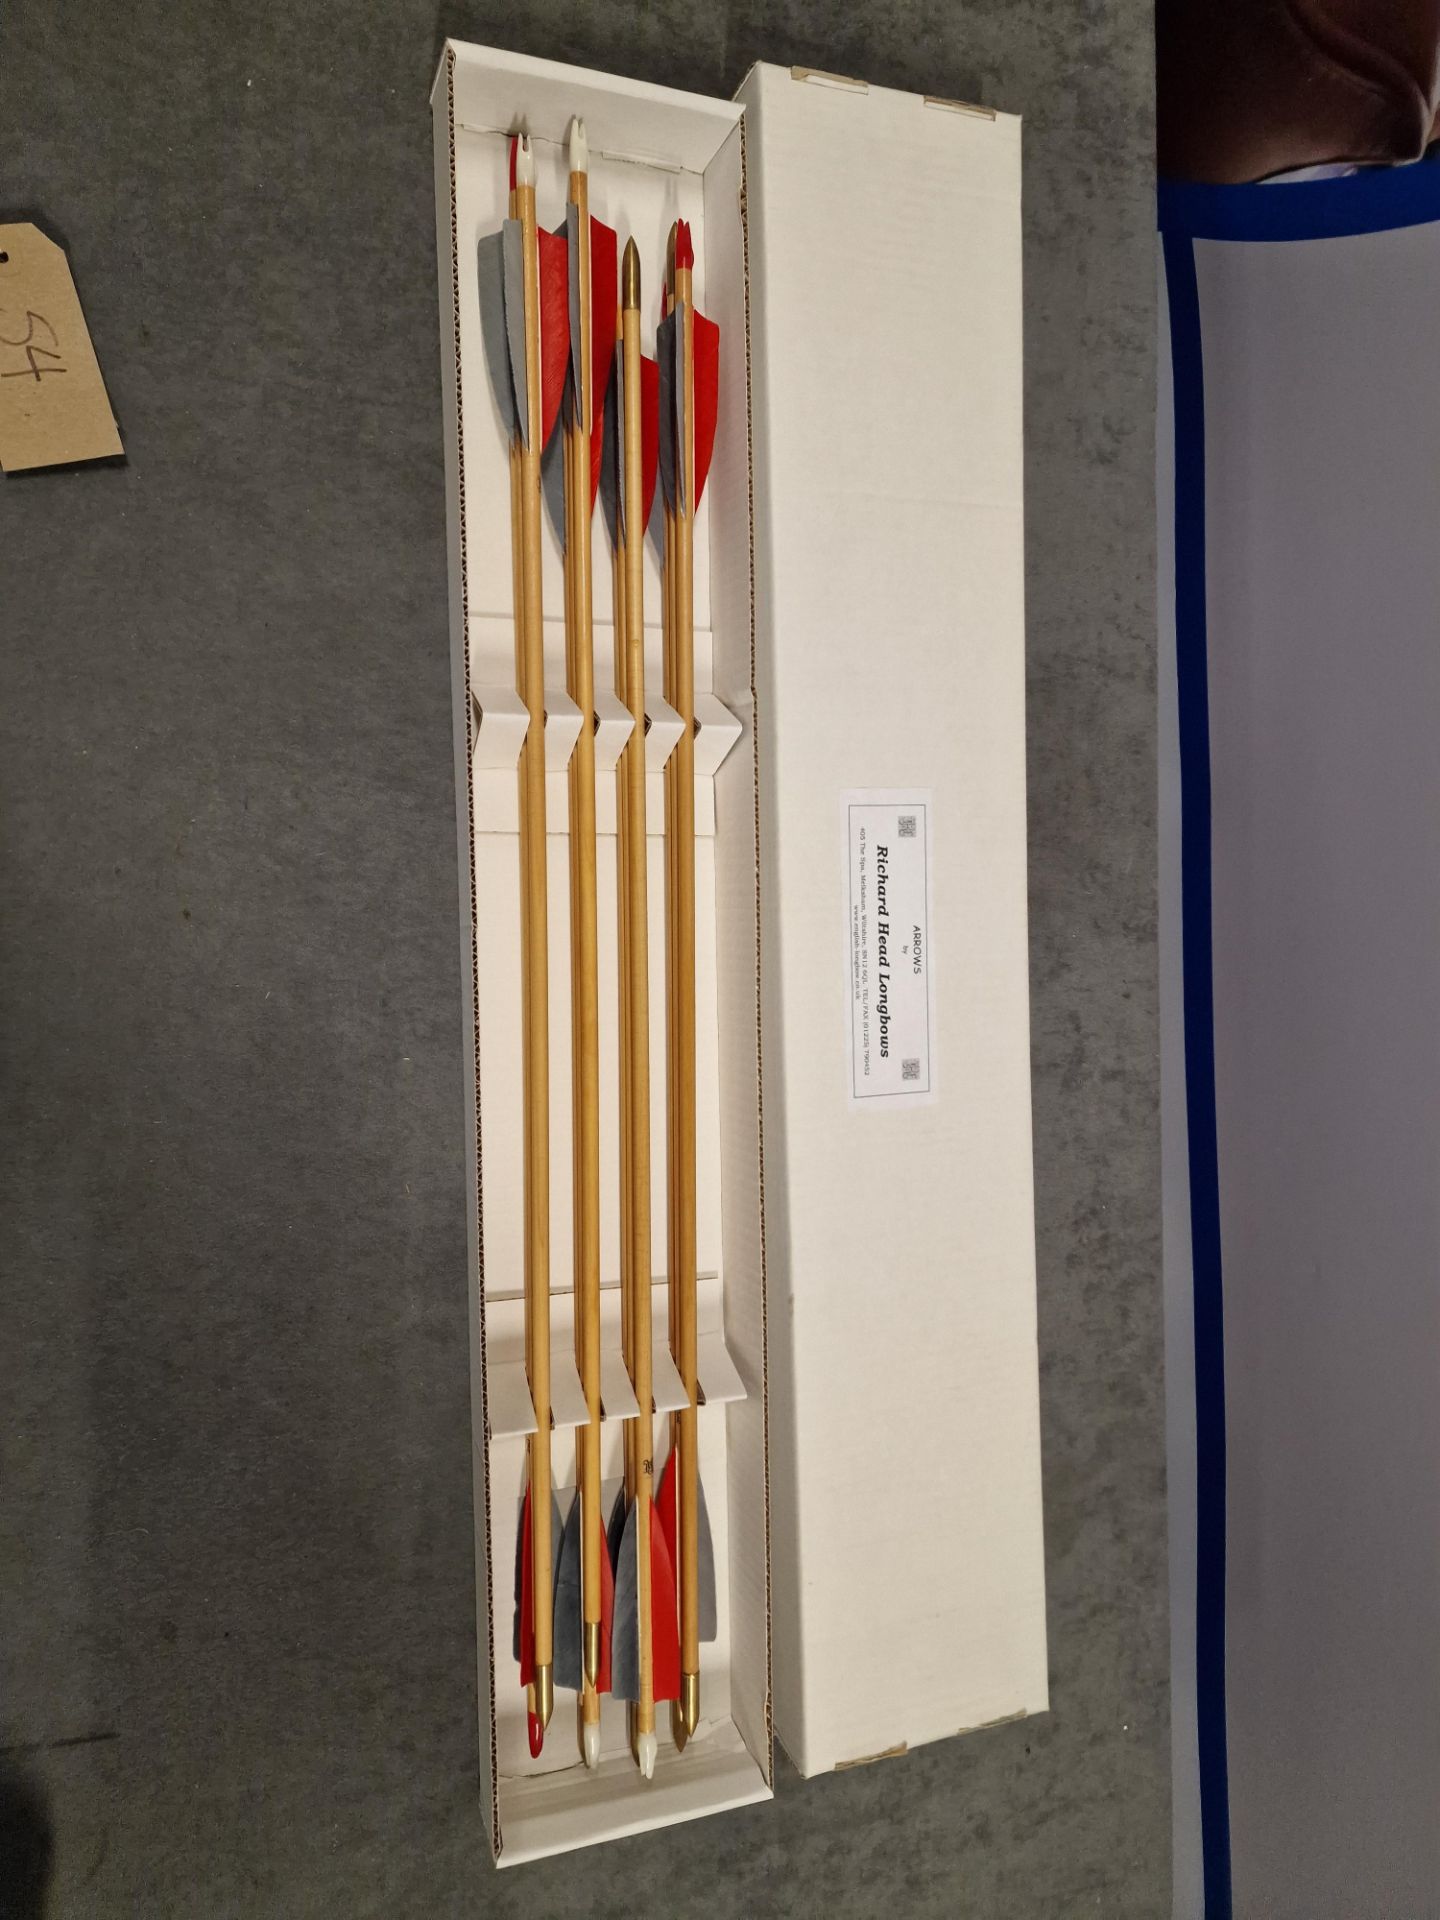 12 X Richard Head Longbow Arrow Shafts In Box Size 29" Never Been Shot - Image 3 of 4